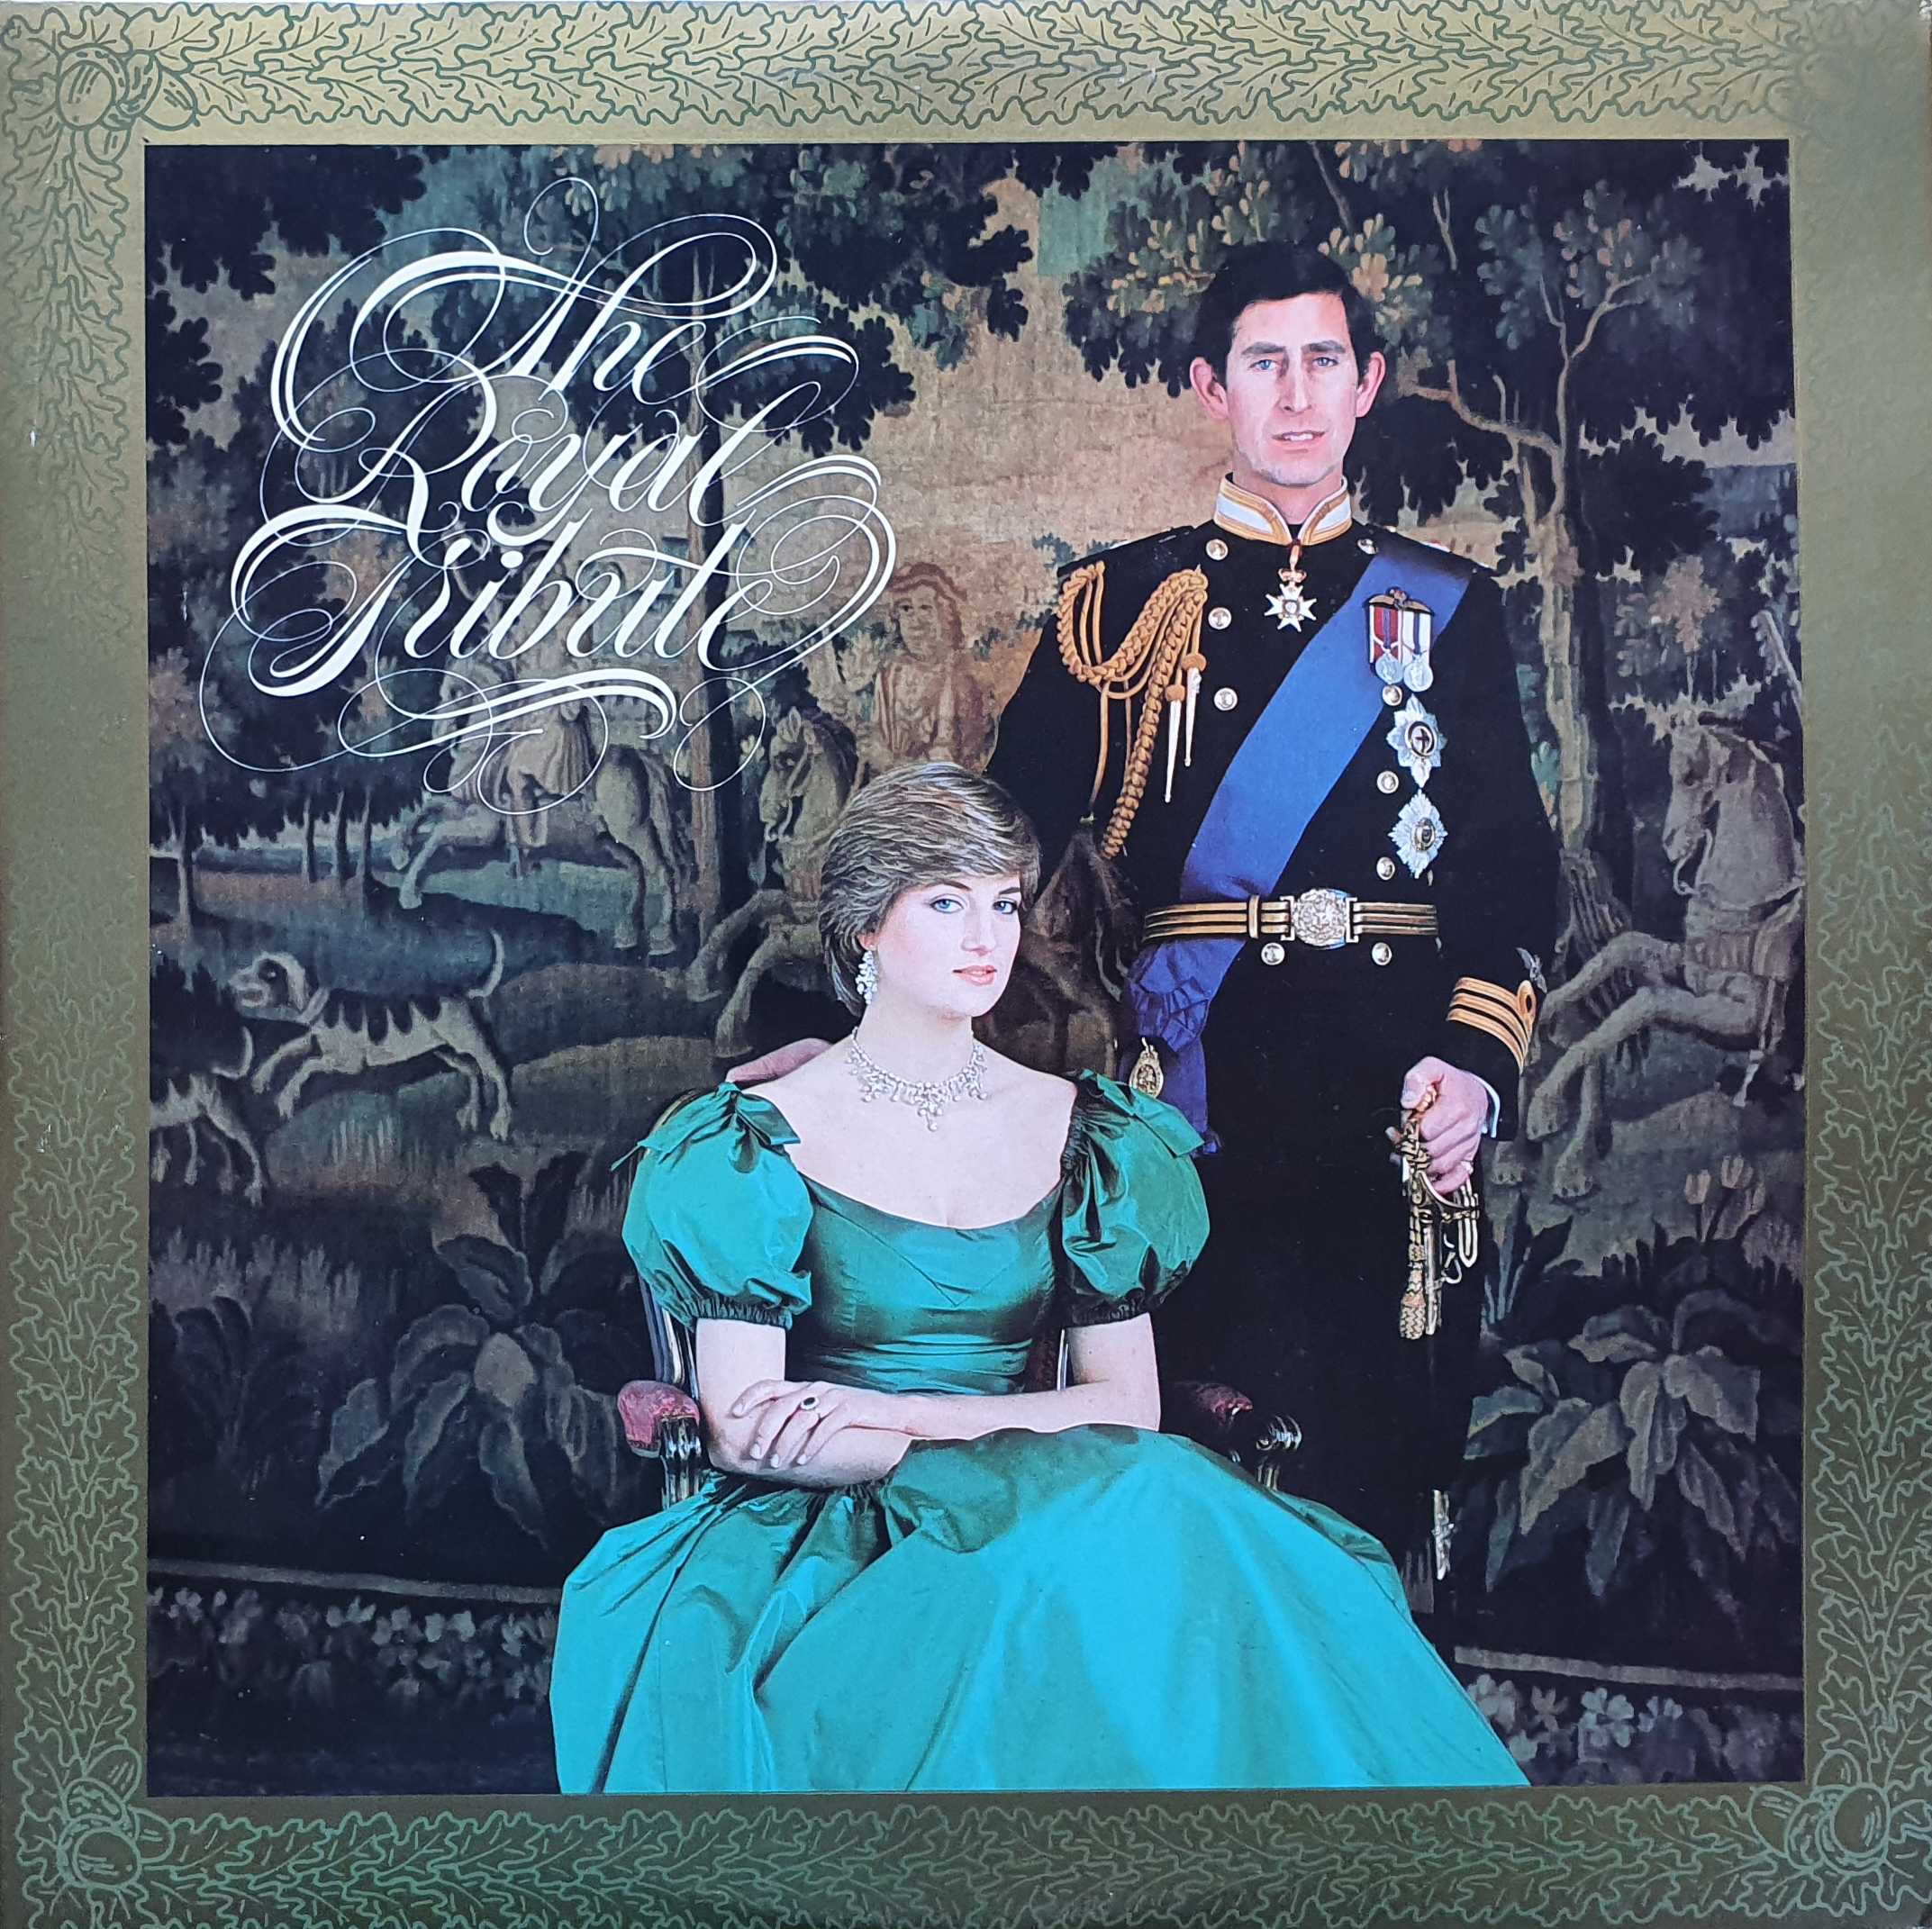 Picture of C2 37655 The royal wedding - Prince Charles / Diana Spencer (US import) by artist Various from the BBC albums - Records and Tapes library